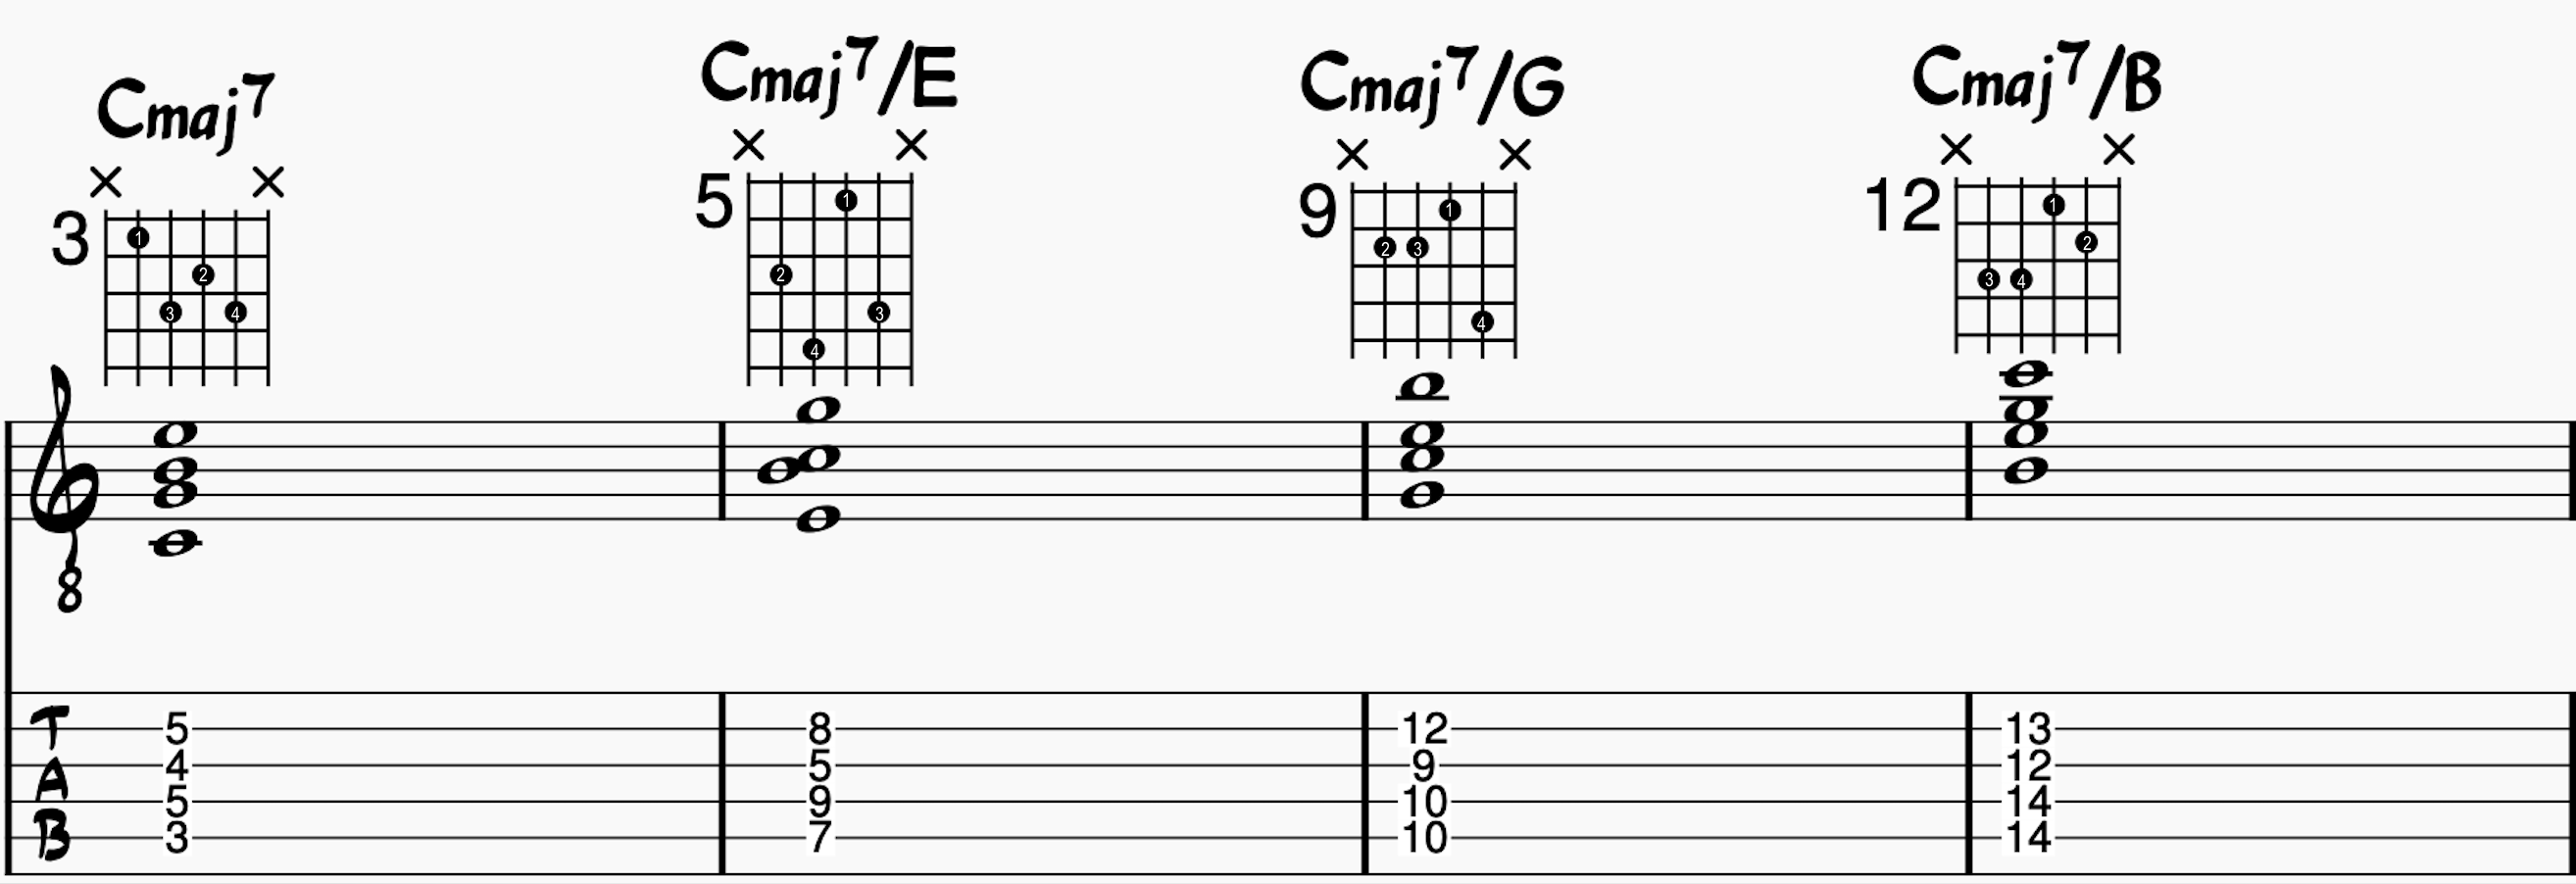 A-D-G-B string Cmaj7 guitar chord in all inversions with chord name